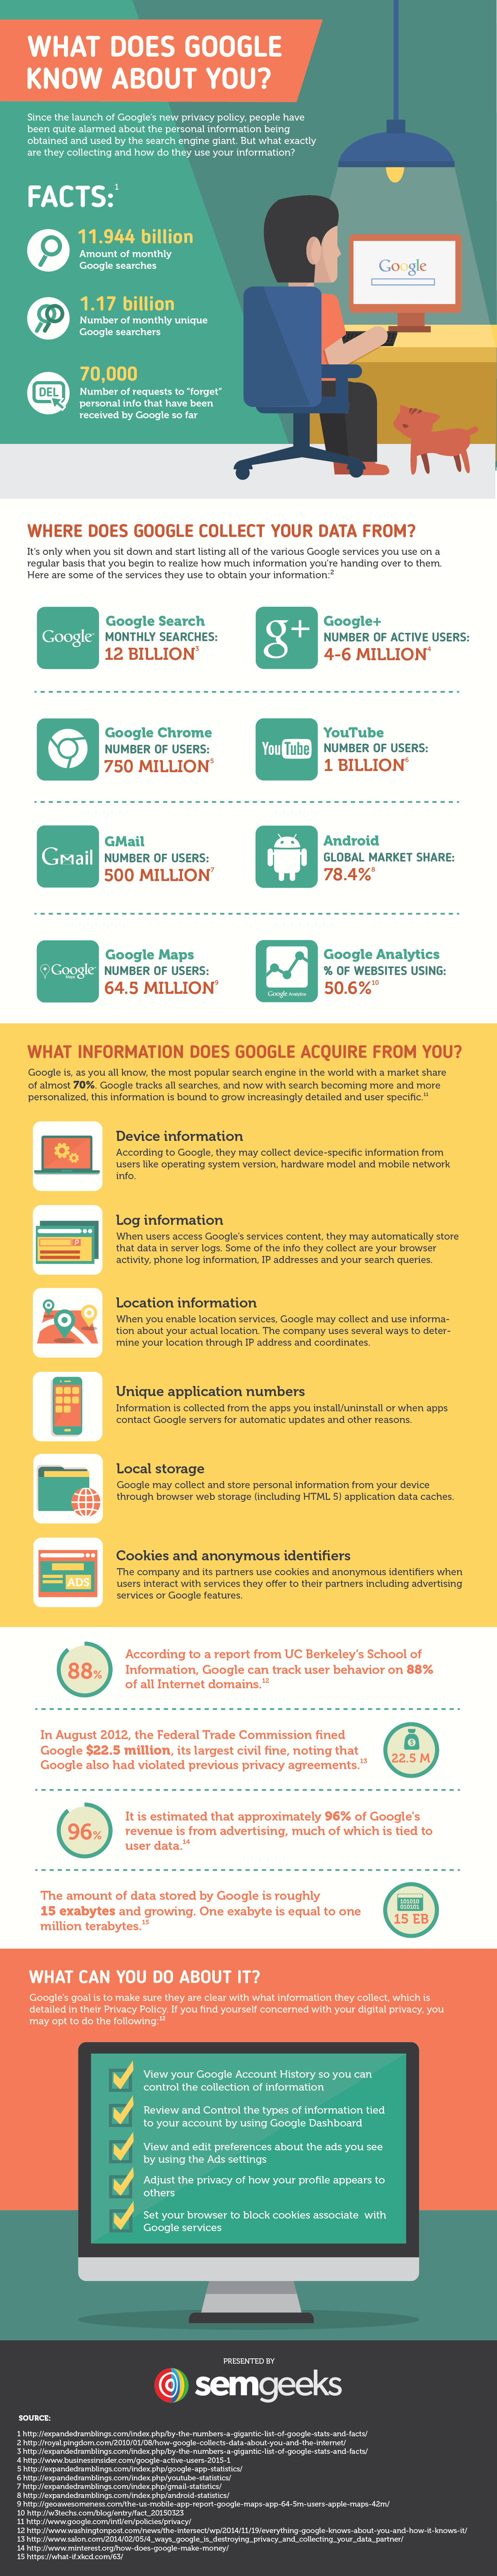 What Types of Information Does Google Collect About Us? 